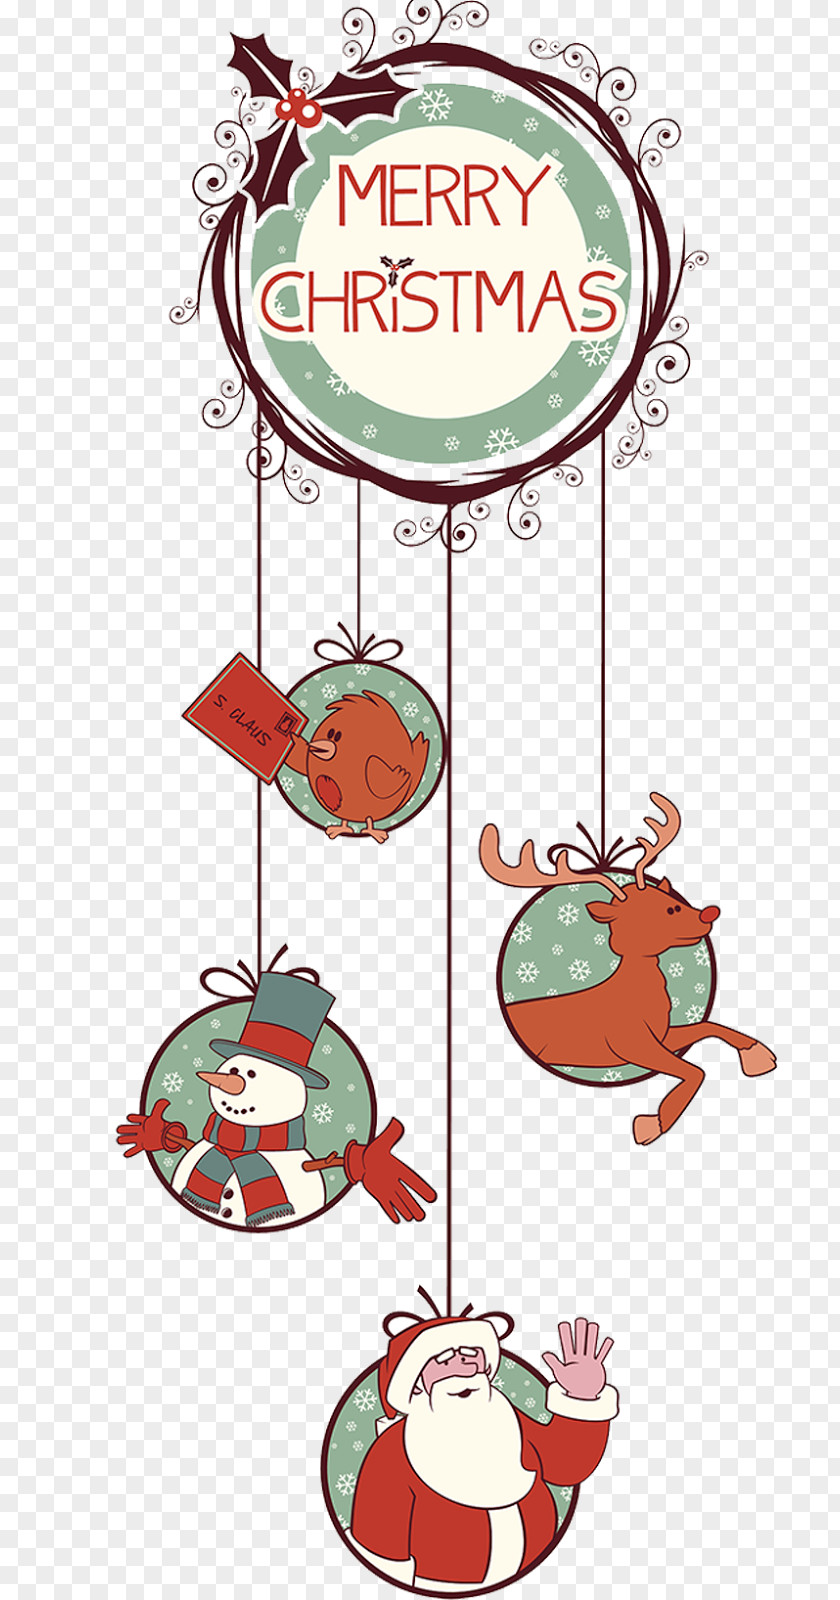 New Year Decoration Poster Christmas Tree Ornament Clip Art PNG